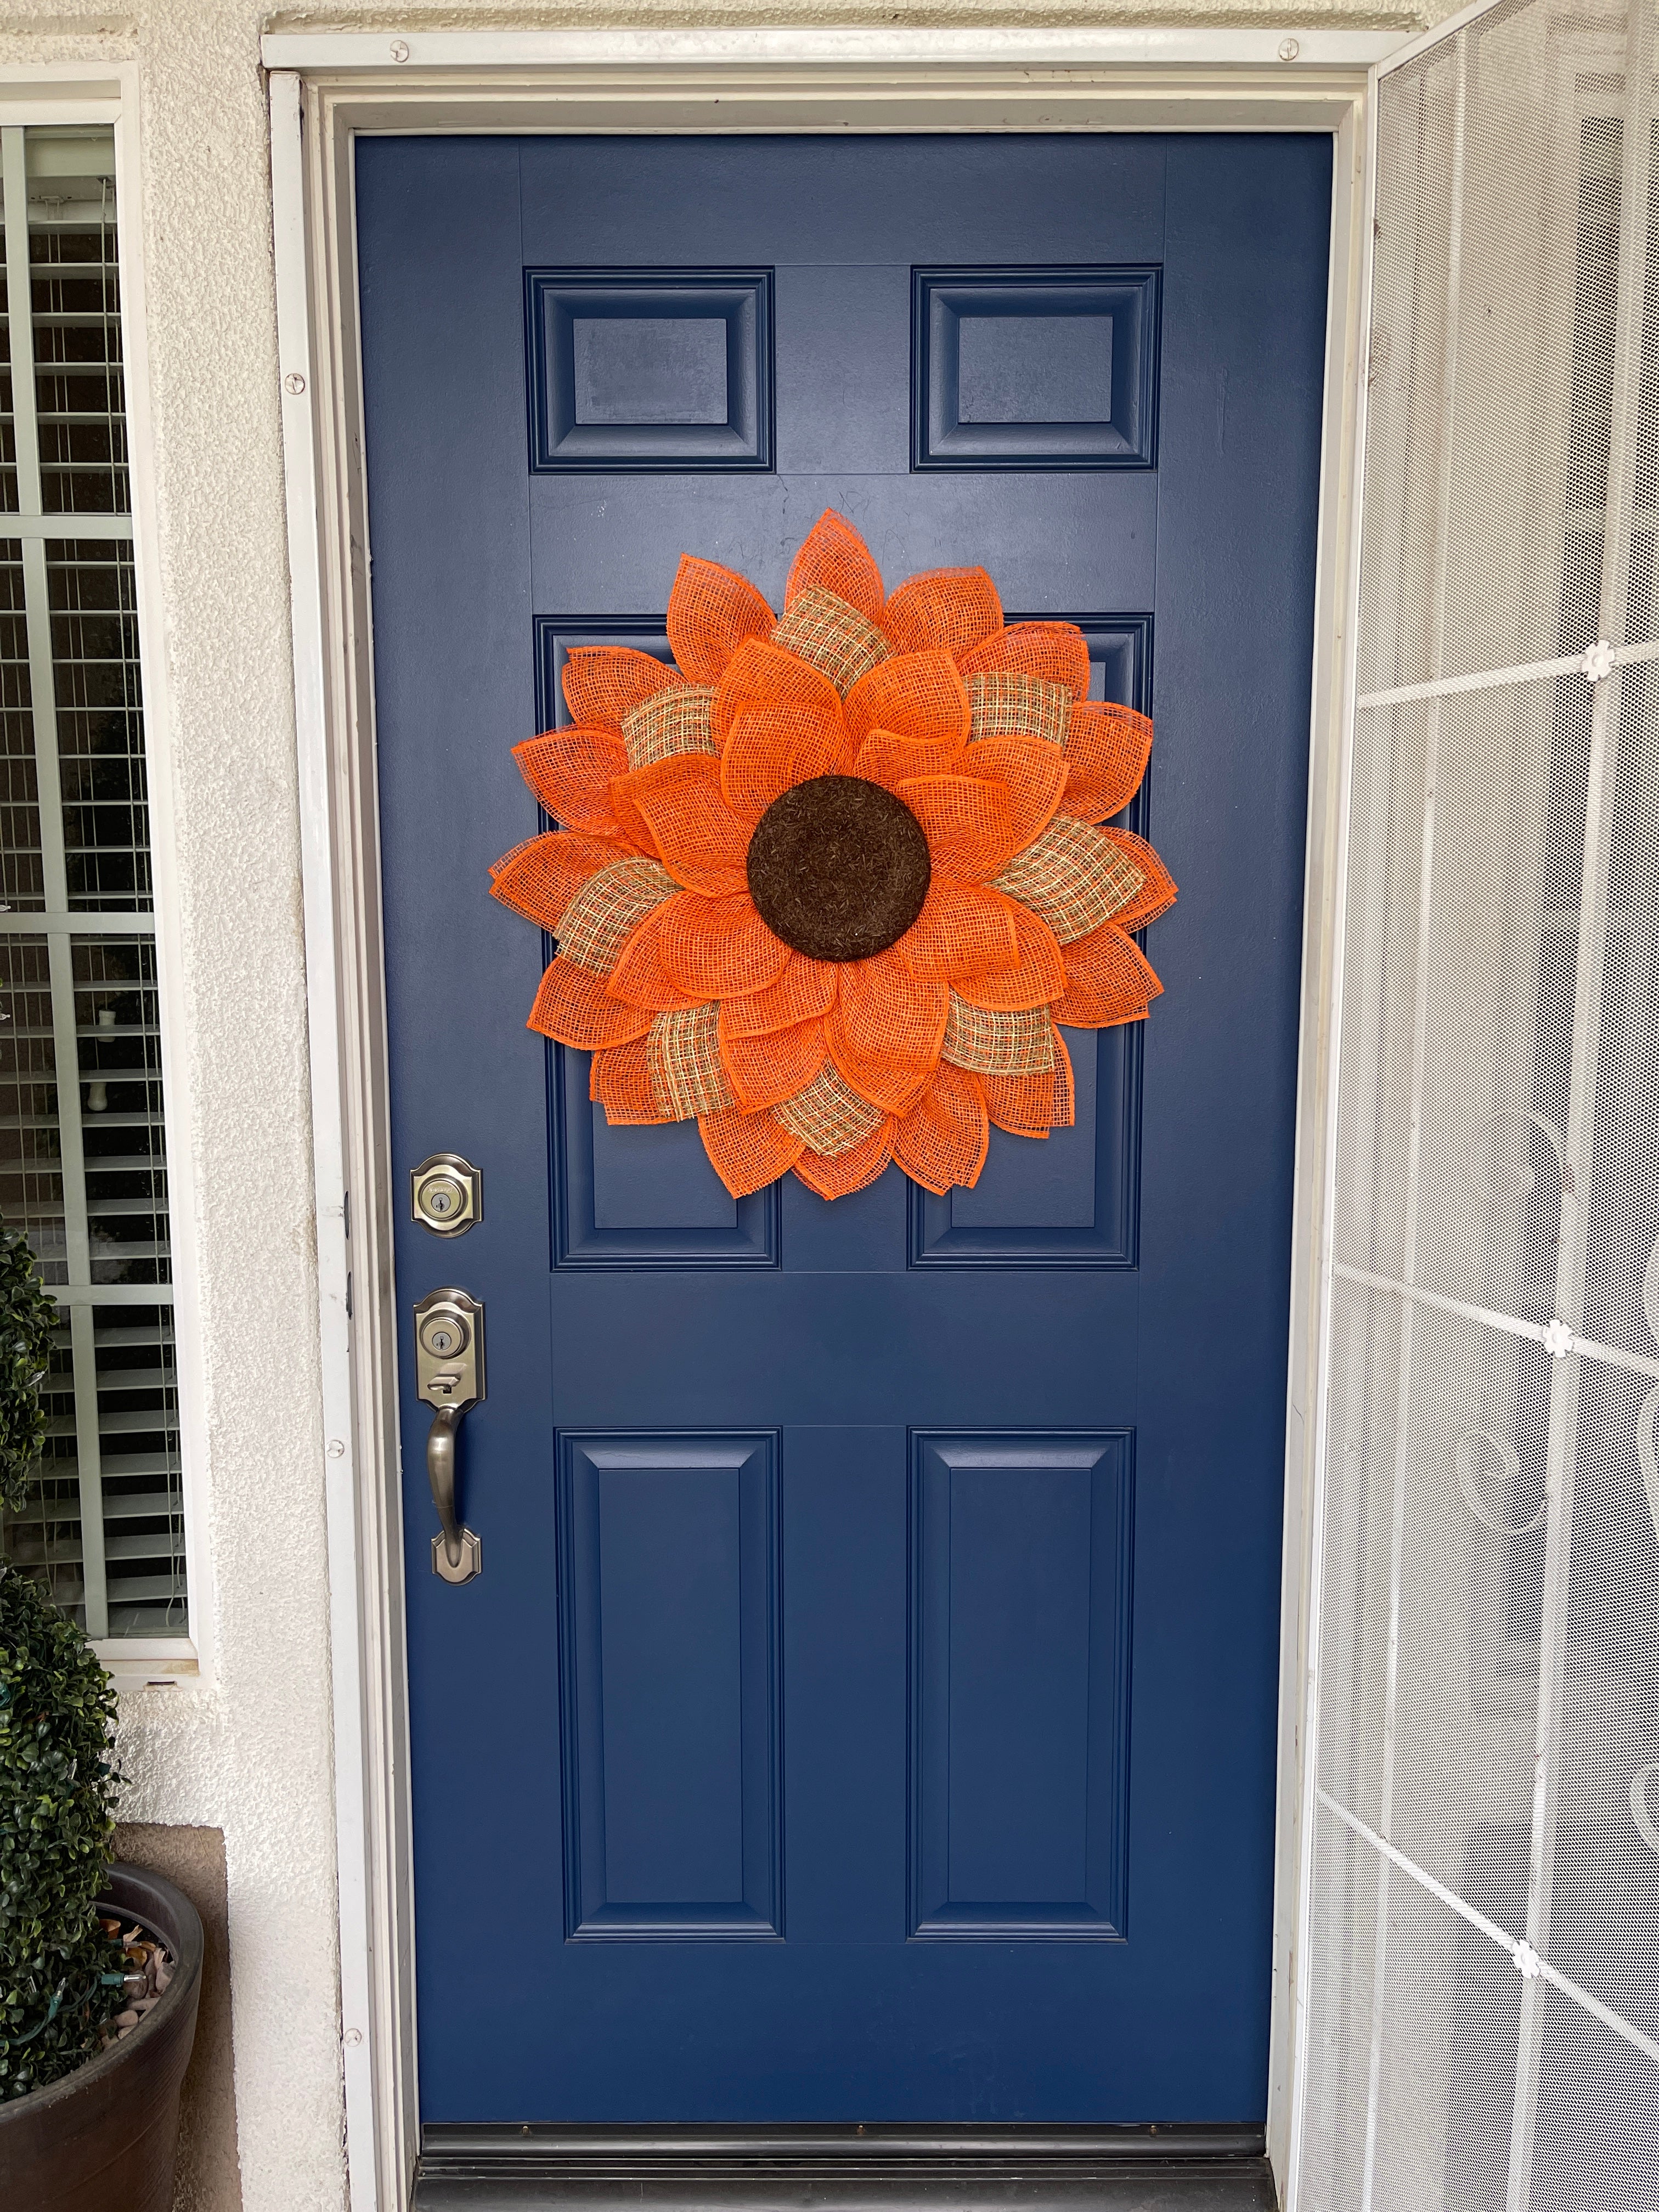 Poly Burlap Mesh Sunflower Wreath Featuring Orange and Patterned Colors of Yellow, Brown and Orange with a Brown Center on a Blue Door 